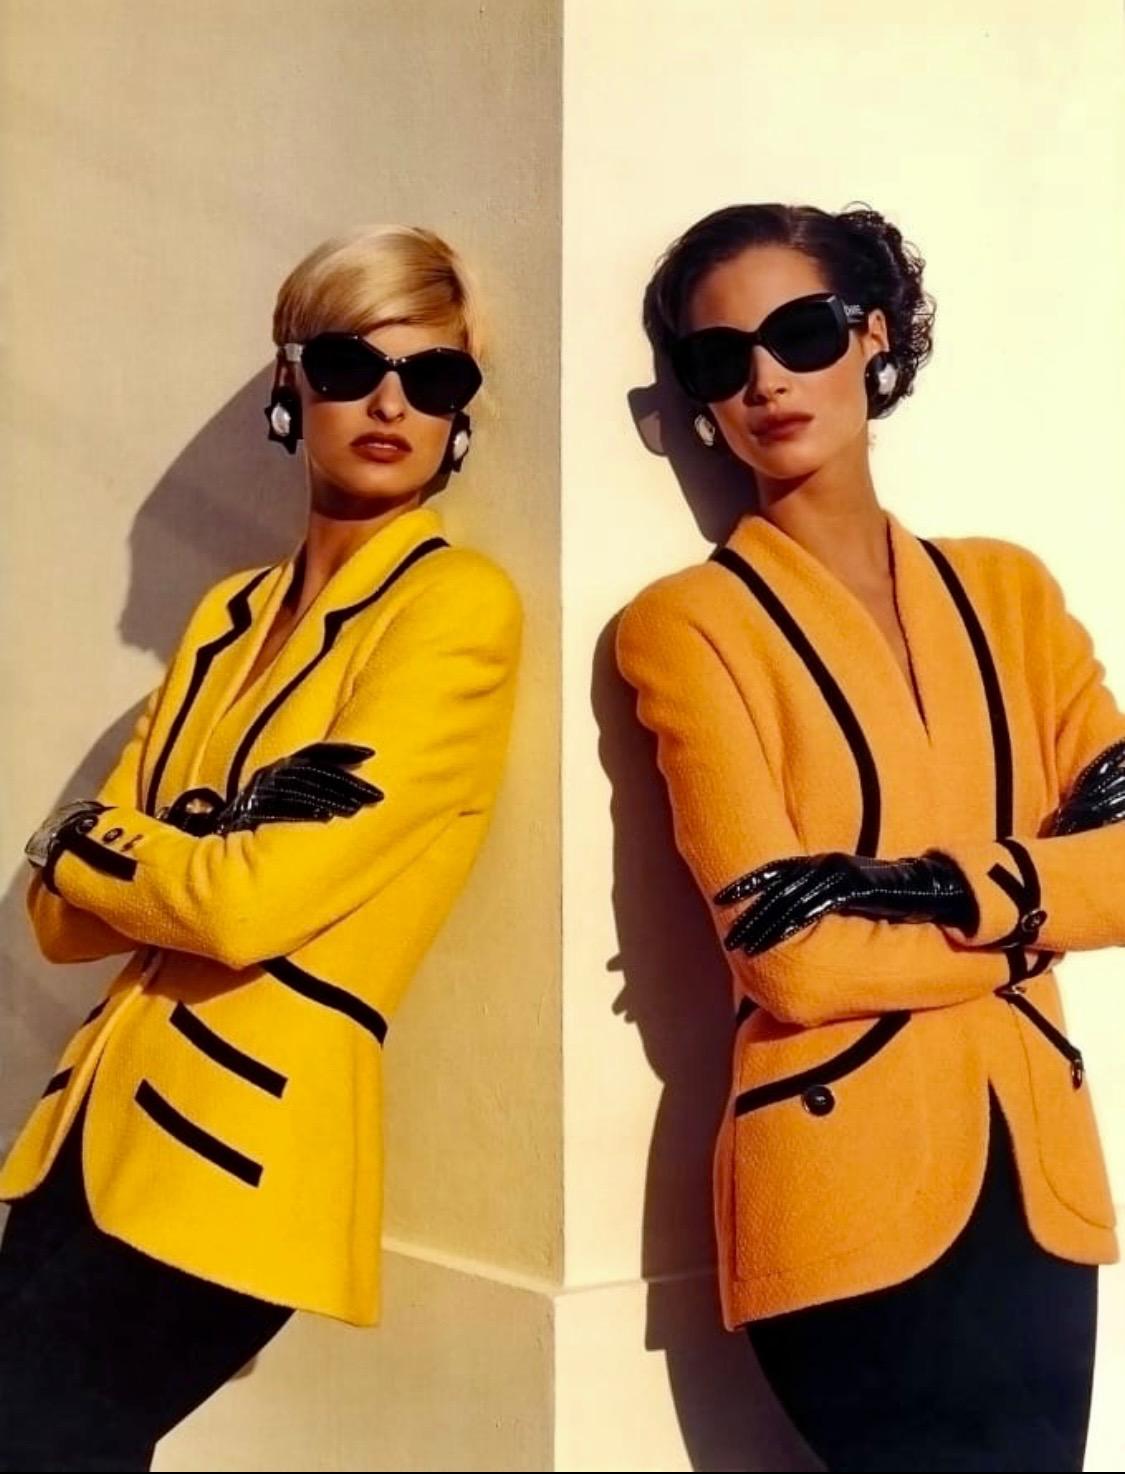 Presenting a bright yellow tweed Chanel skirt suit, designed by Karl Lagerfeld. The classic set was created as part of Karl's S/S 1991 collection and was notably worn by Linda Evangelista for that season's campaign. The blazer with a similar skirt